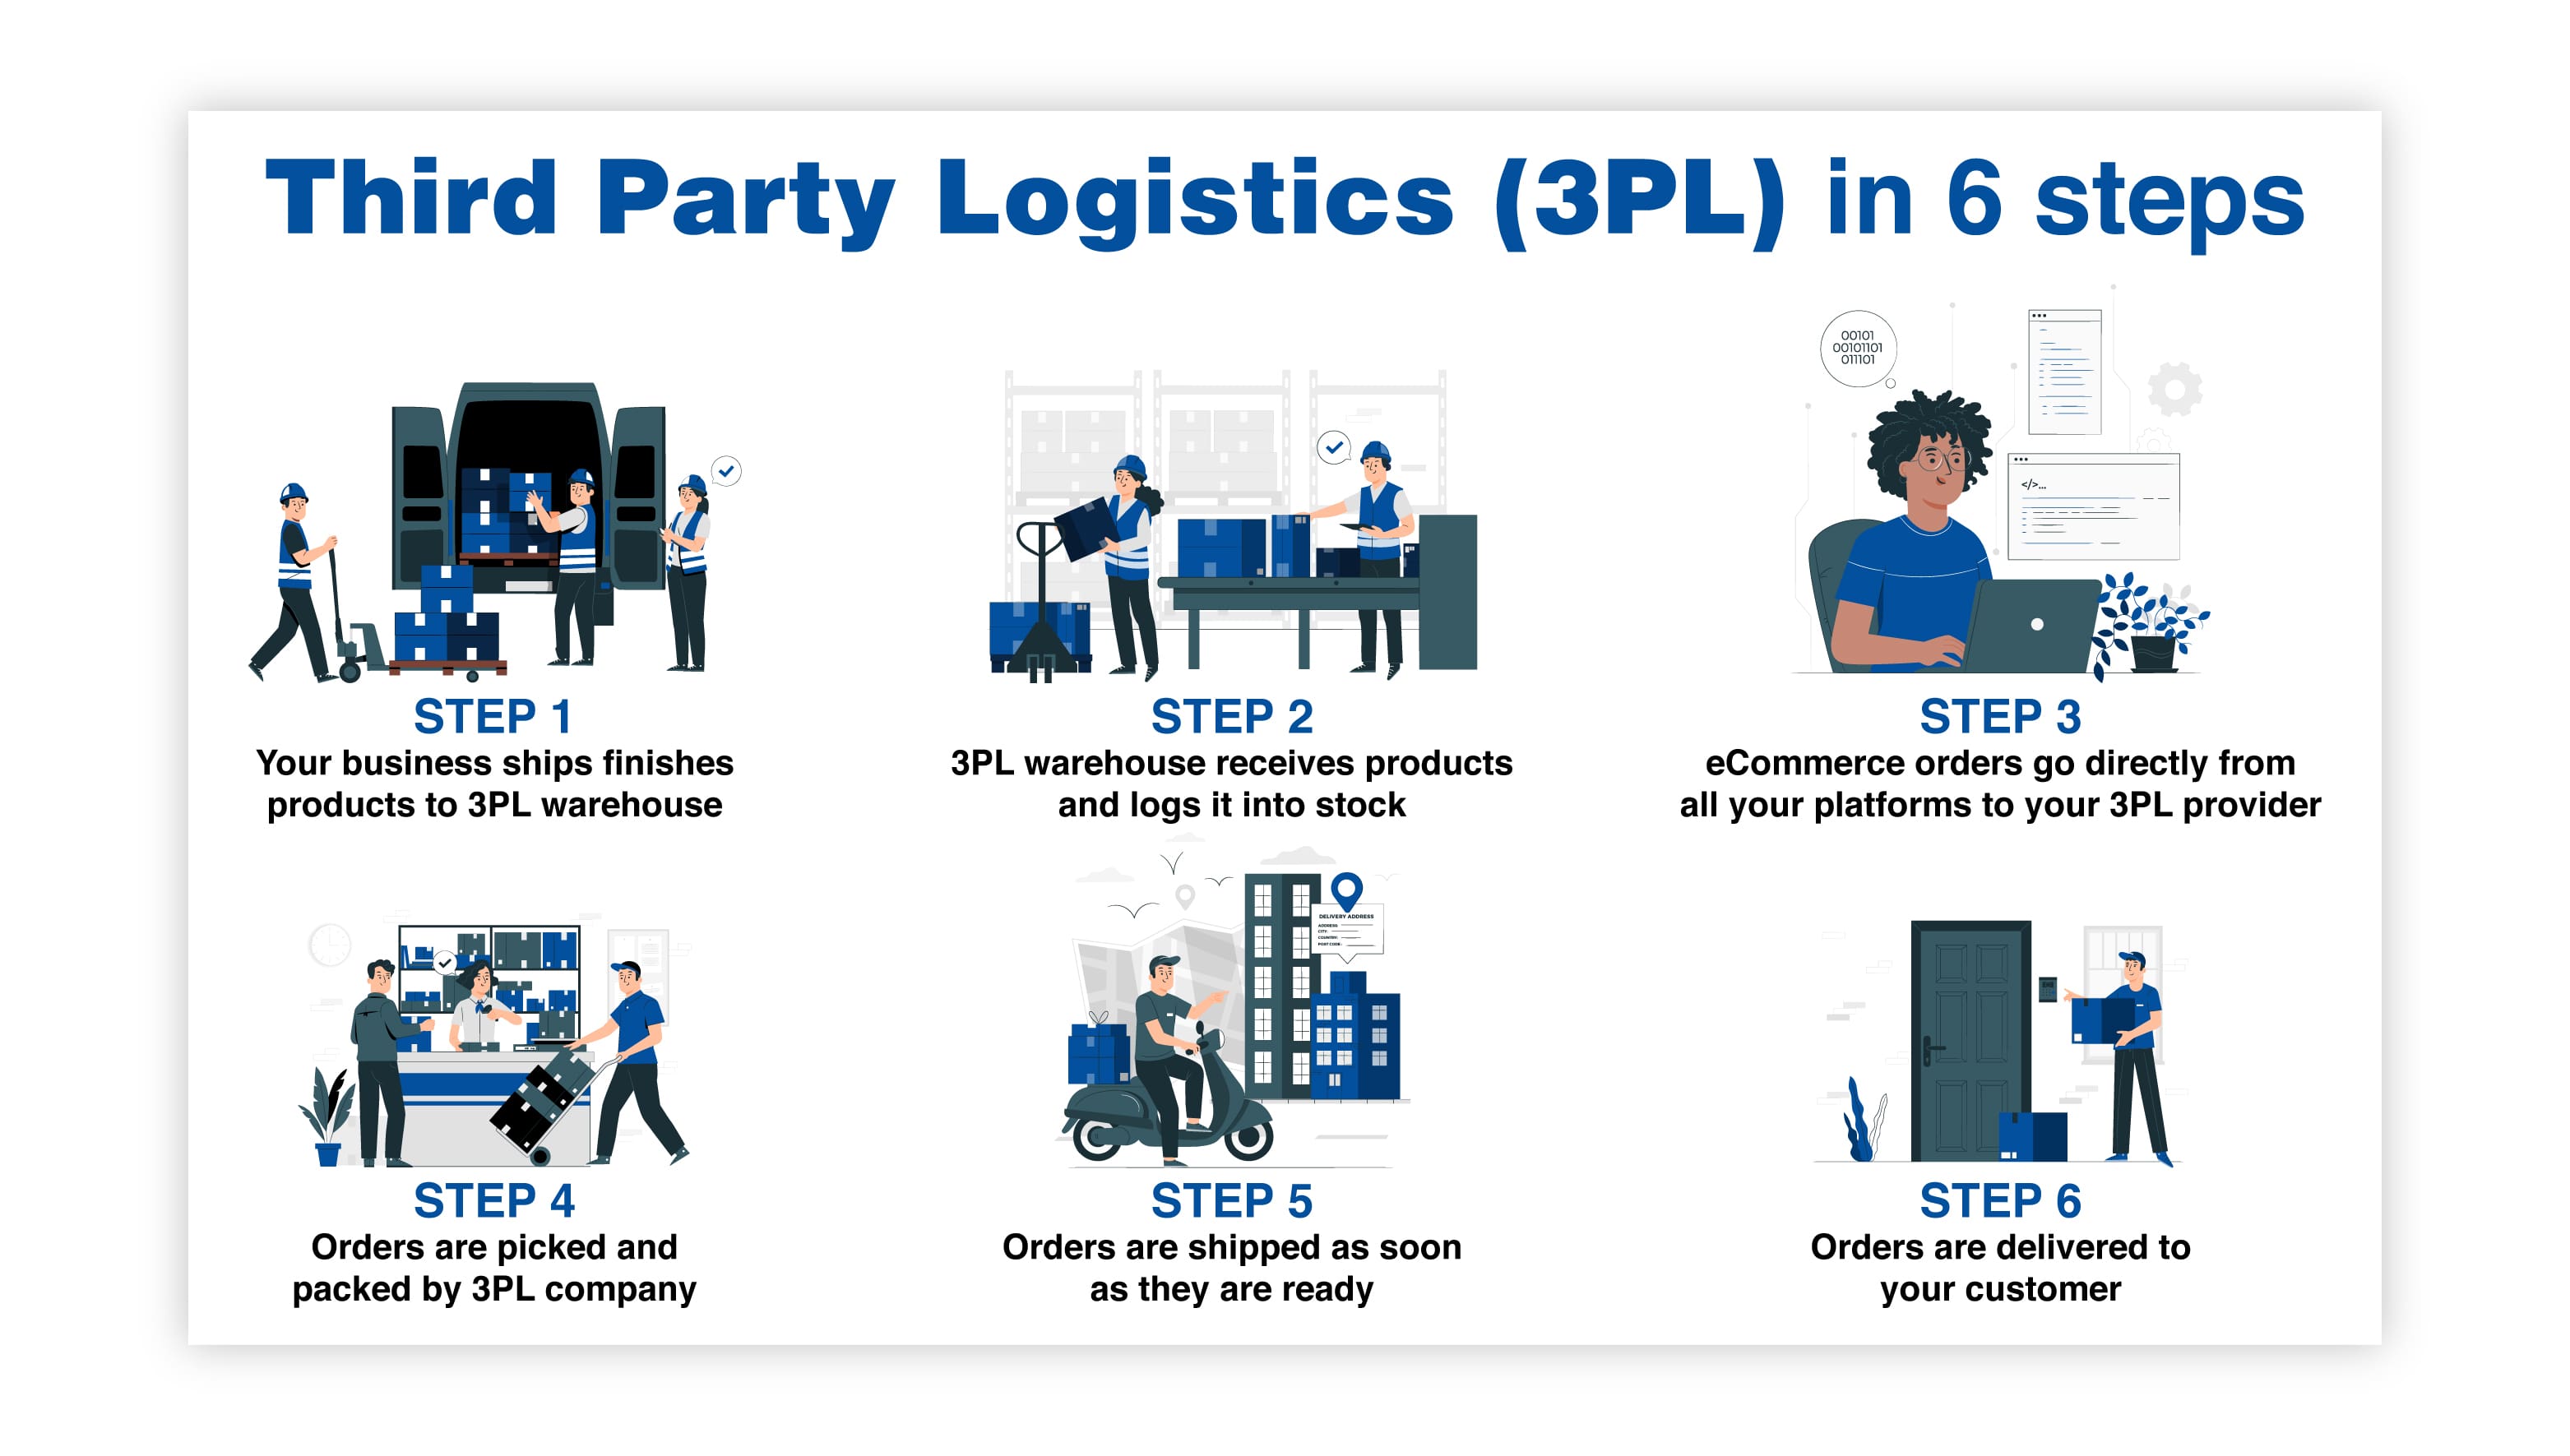 Third Party Logistics (3PL) in 6 steps